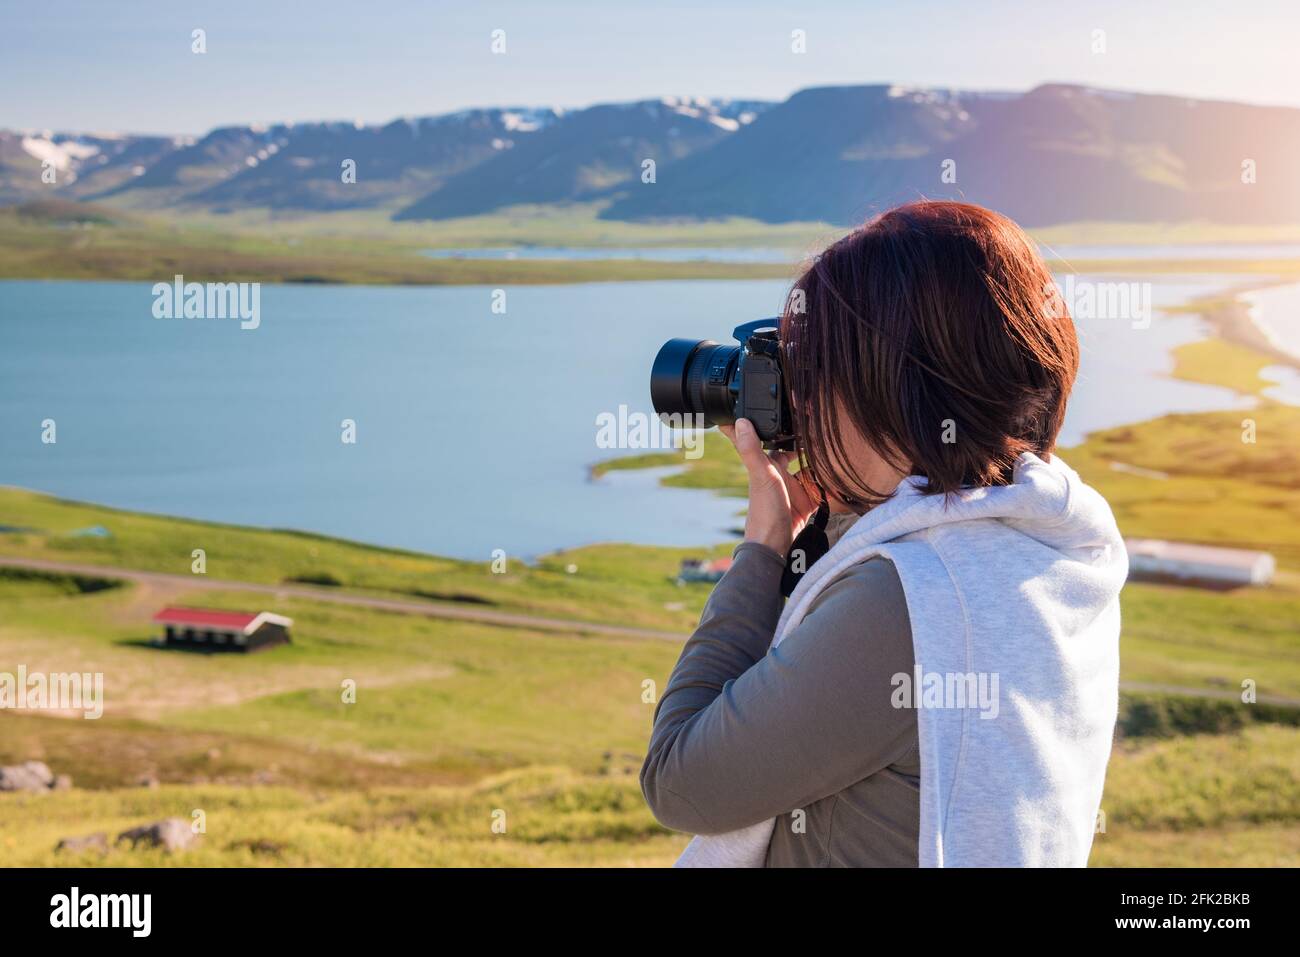 Woman photographer taking photos with her professional camera of a majestc coastal scenery at sunset Stock Photo